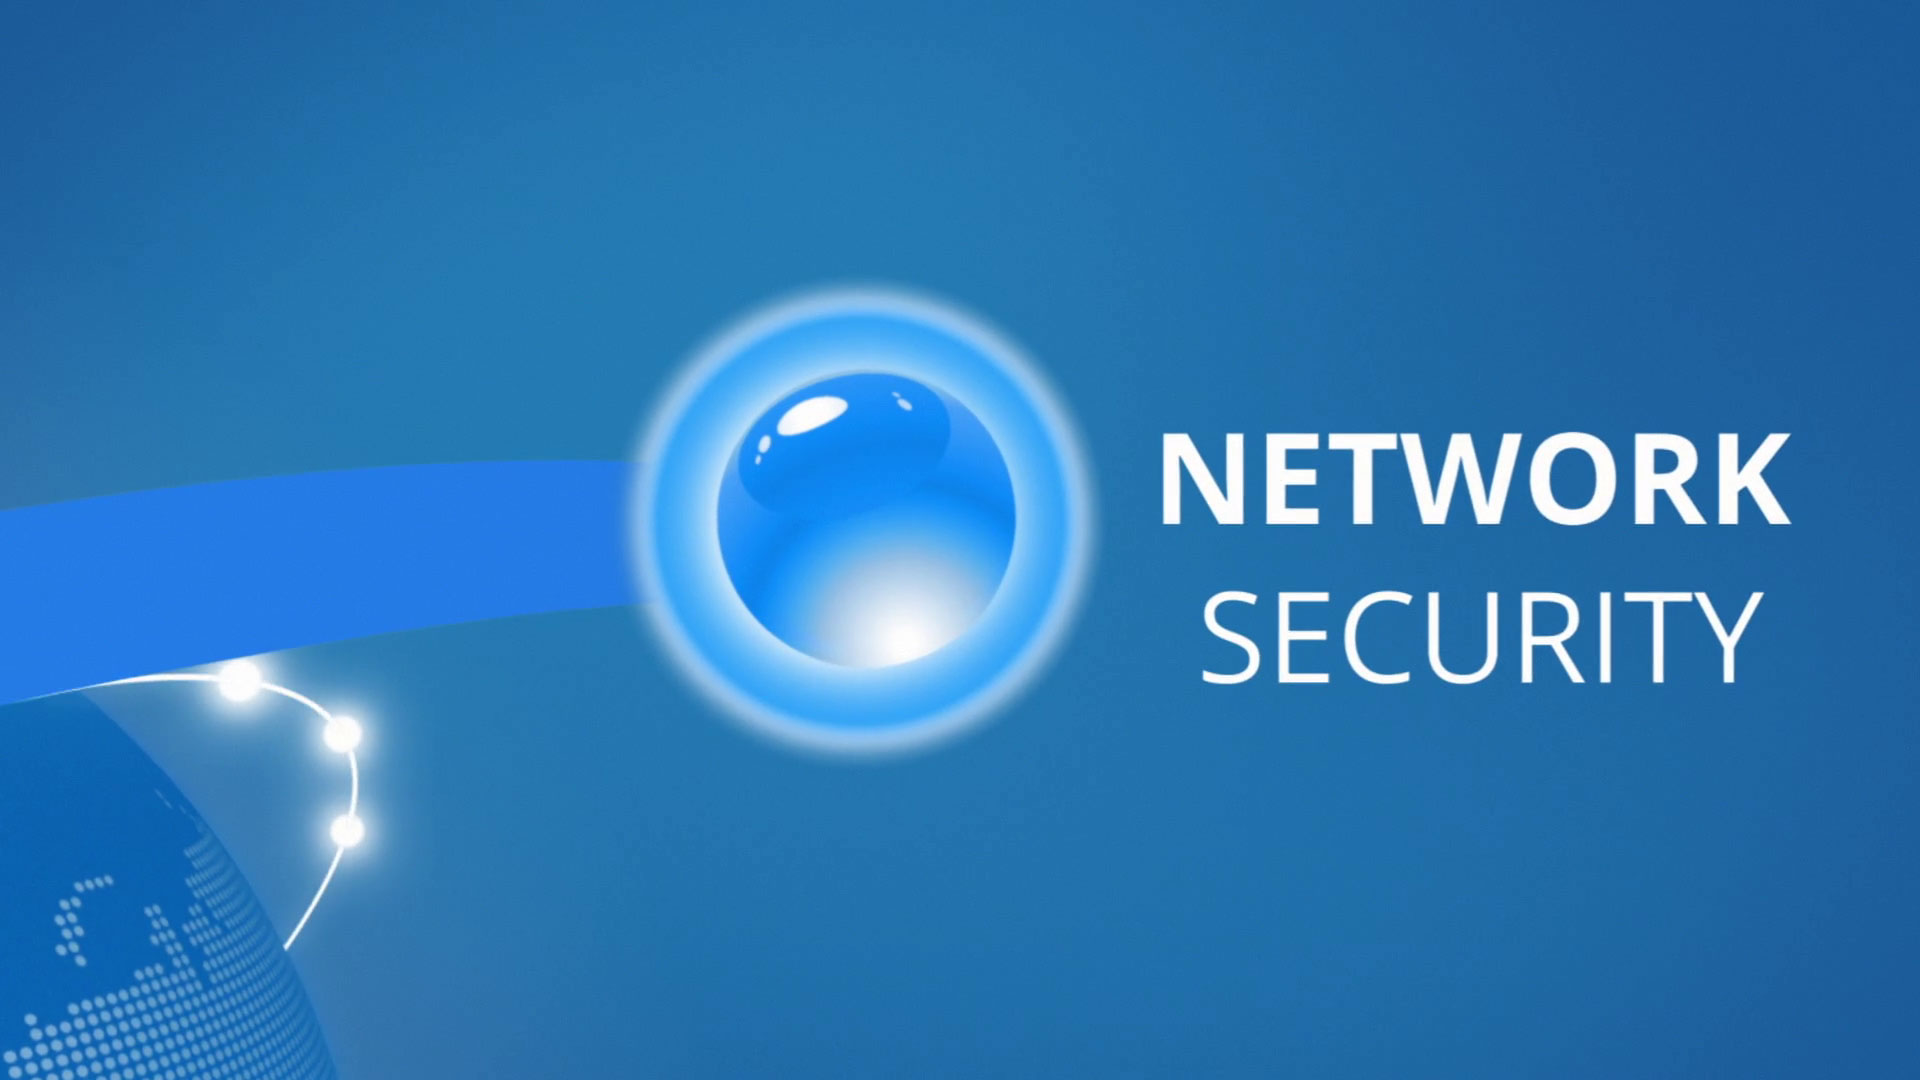 What is Meant by Network Security?